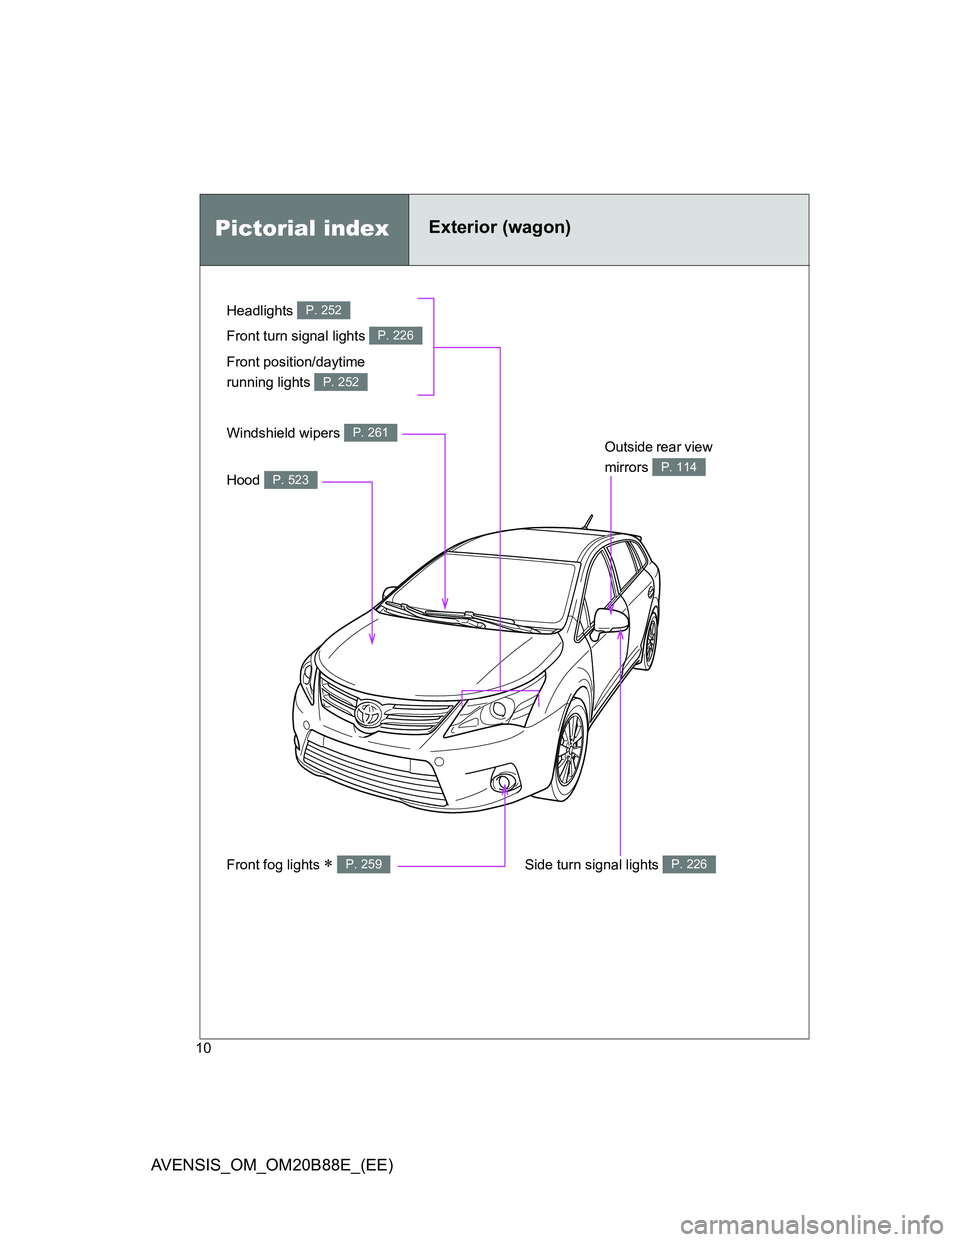 TOYOTA AVENSIS 2014  Owners Manual (in English) 10
AVENSIS_OM_OM20B88E_(EE)
Pictorial indexExterior (wagon)
Headlights P. 252
Front fog lights  P. 259
Front turn signal lights P. 226
Hood P. 523
Windshield wipers P. 261Outside rear view 
mirrors